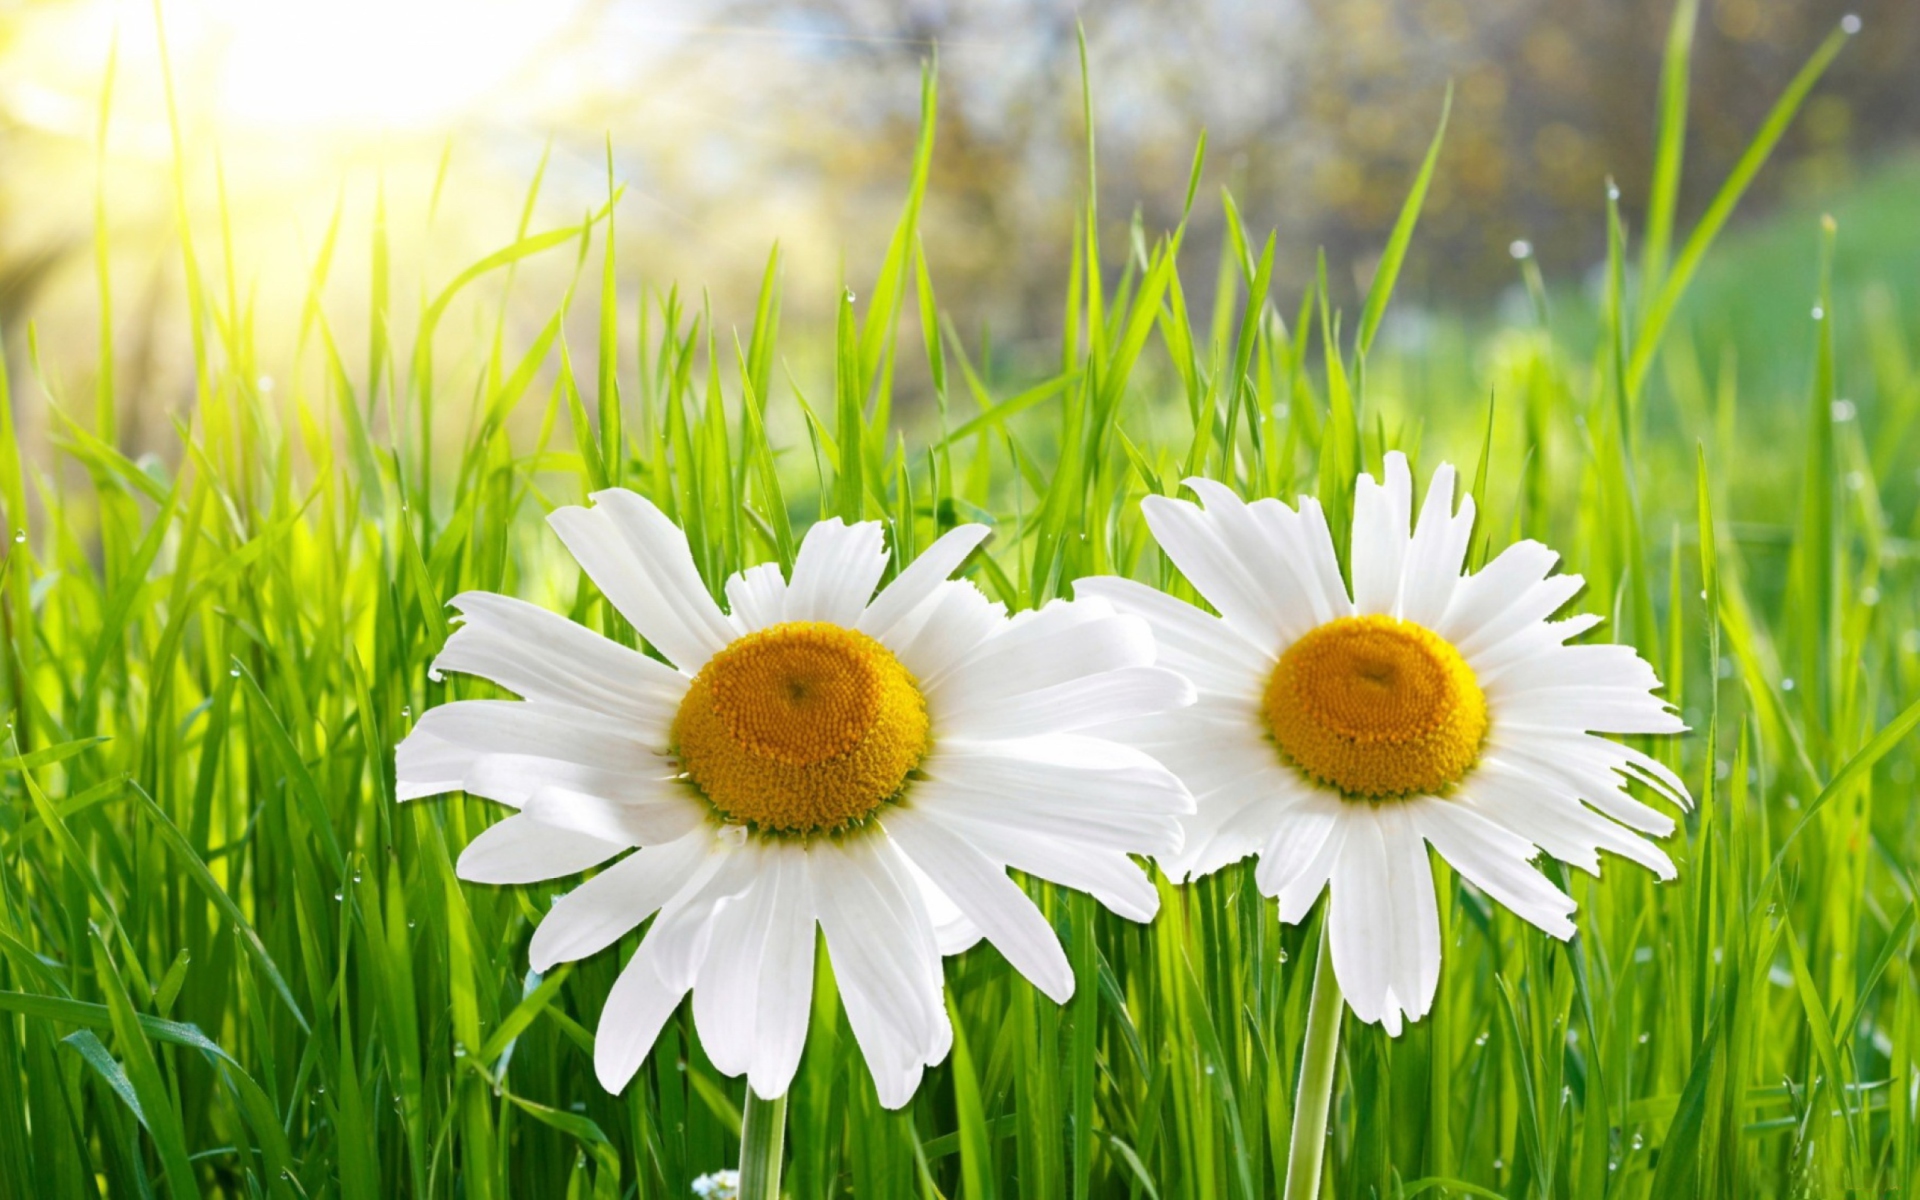 earth, camomile, close up, daisy, flower, grass, white flower, flowers